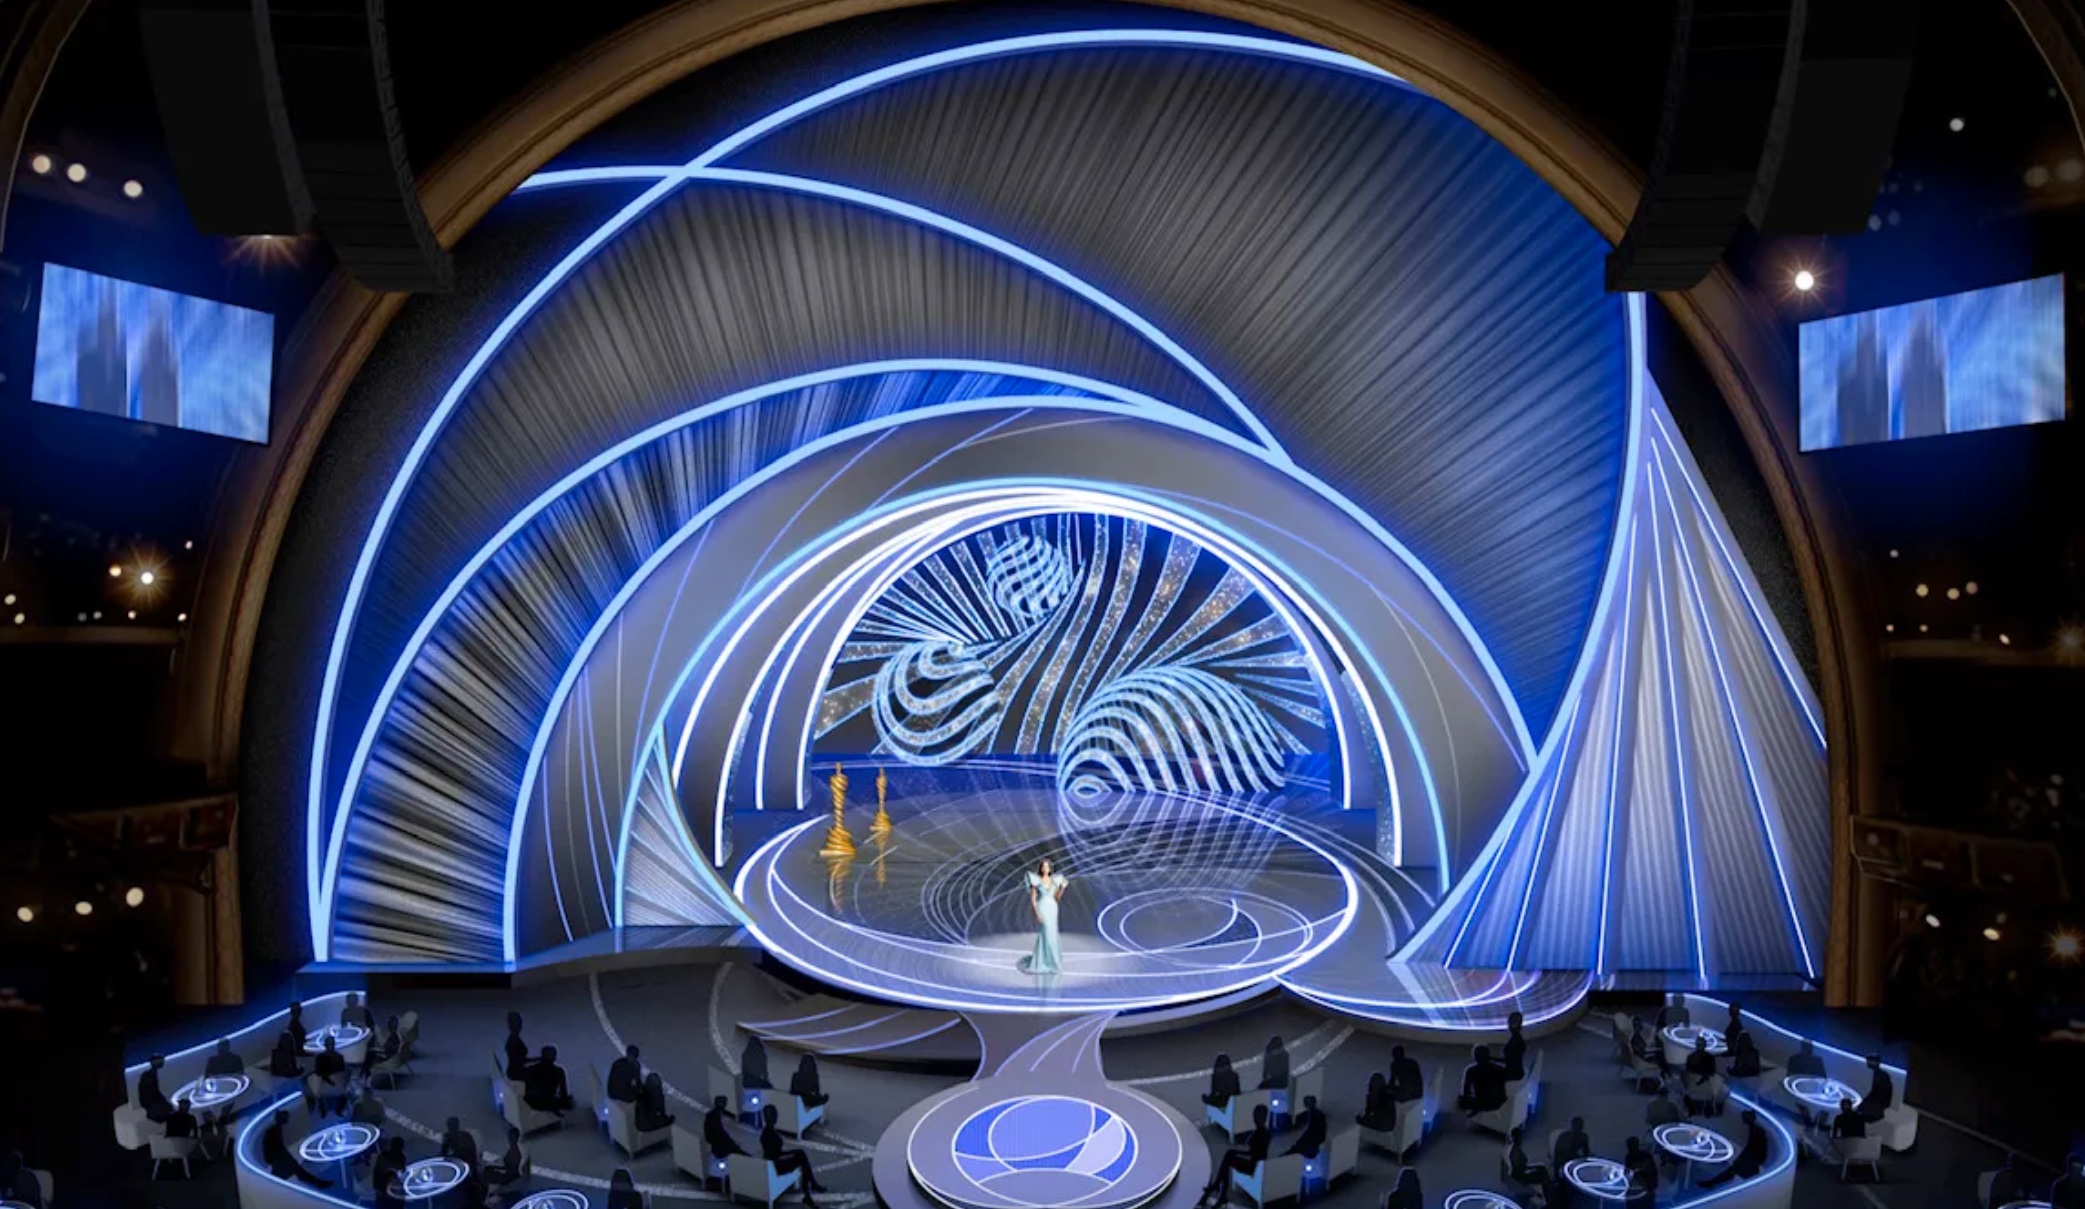 David Korins rendering for the 94th Oscars